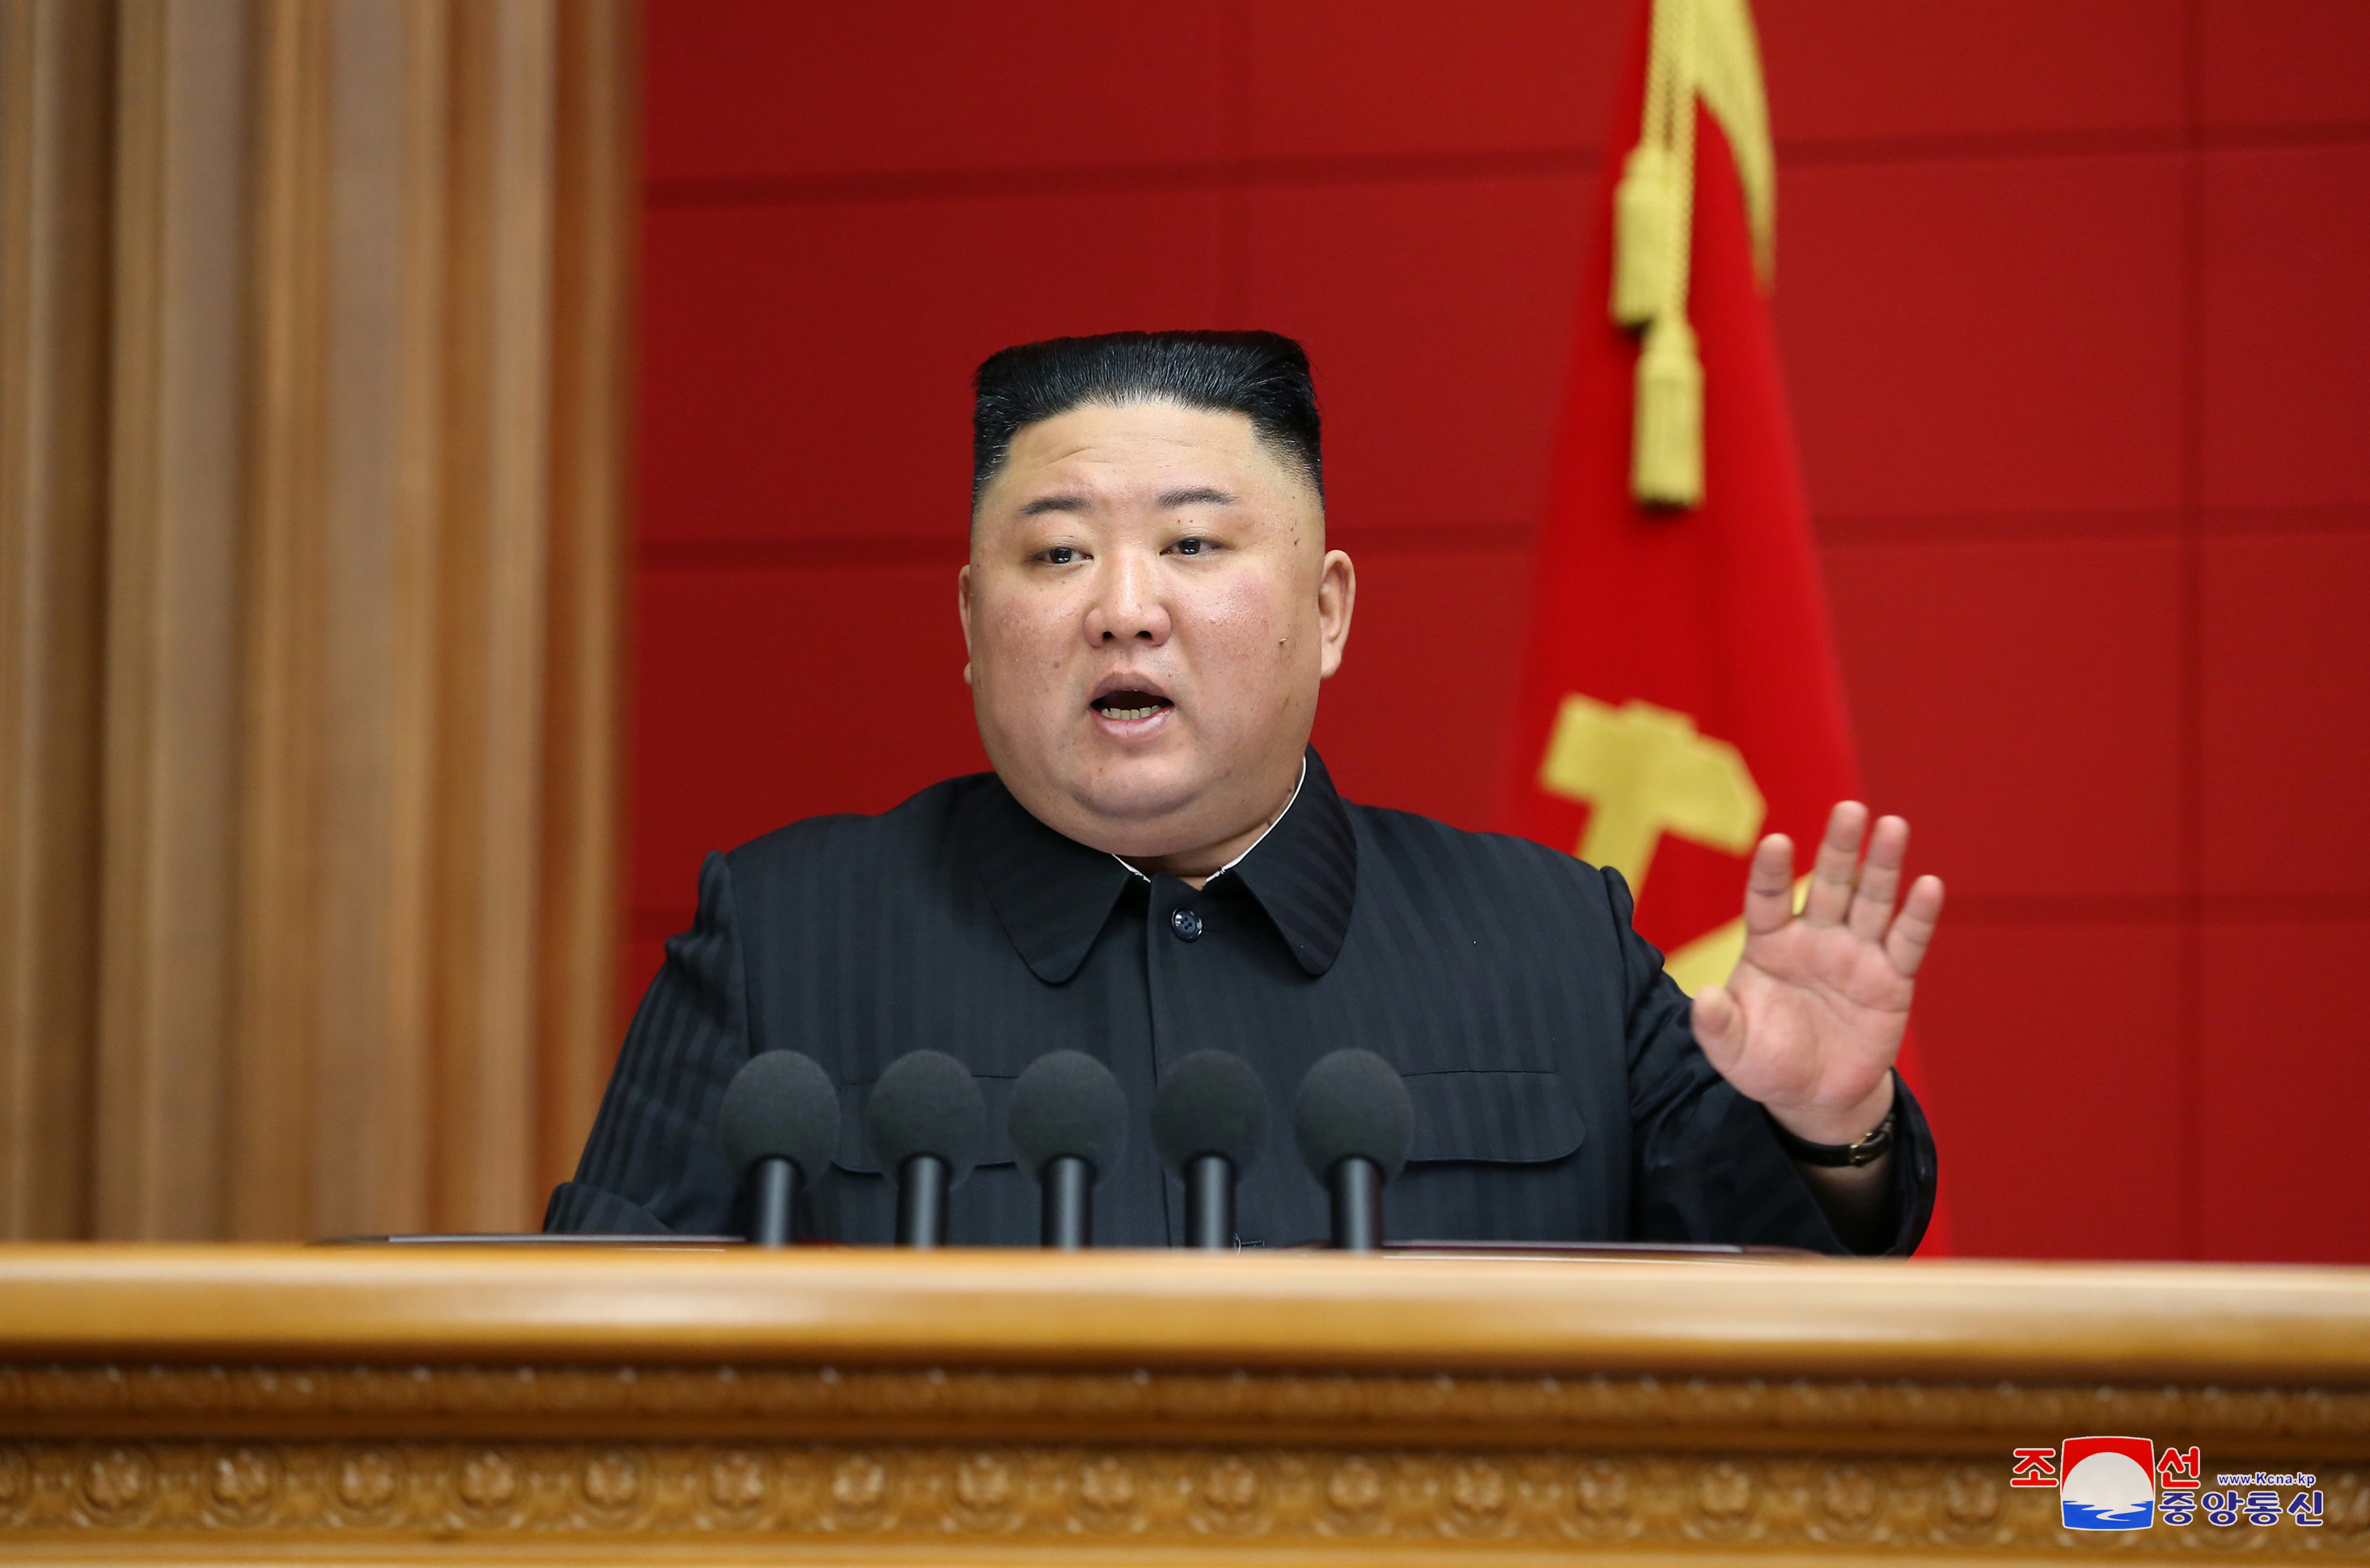 North Korea's leader Kim Jong Un addresses the first short course for chief secretaries of the city and county Party committees in Pyongyang, North Korea, in this undated photo released March 7, 2021 by North Korea's Korean Central News Agency (KCNA).     KCNA via REUTERS   